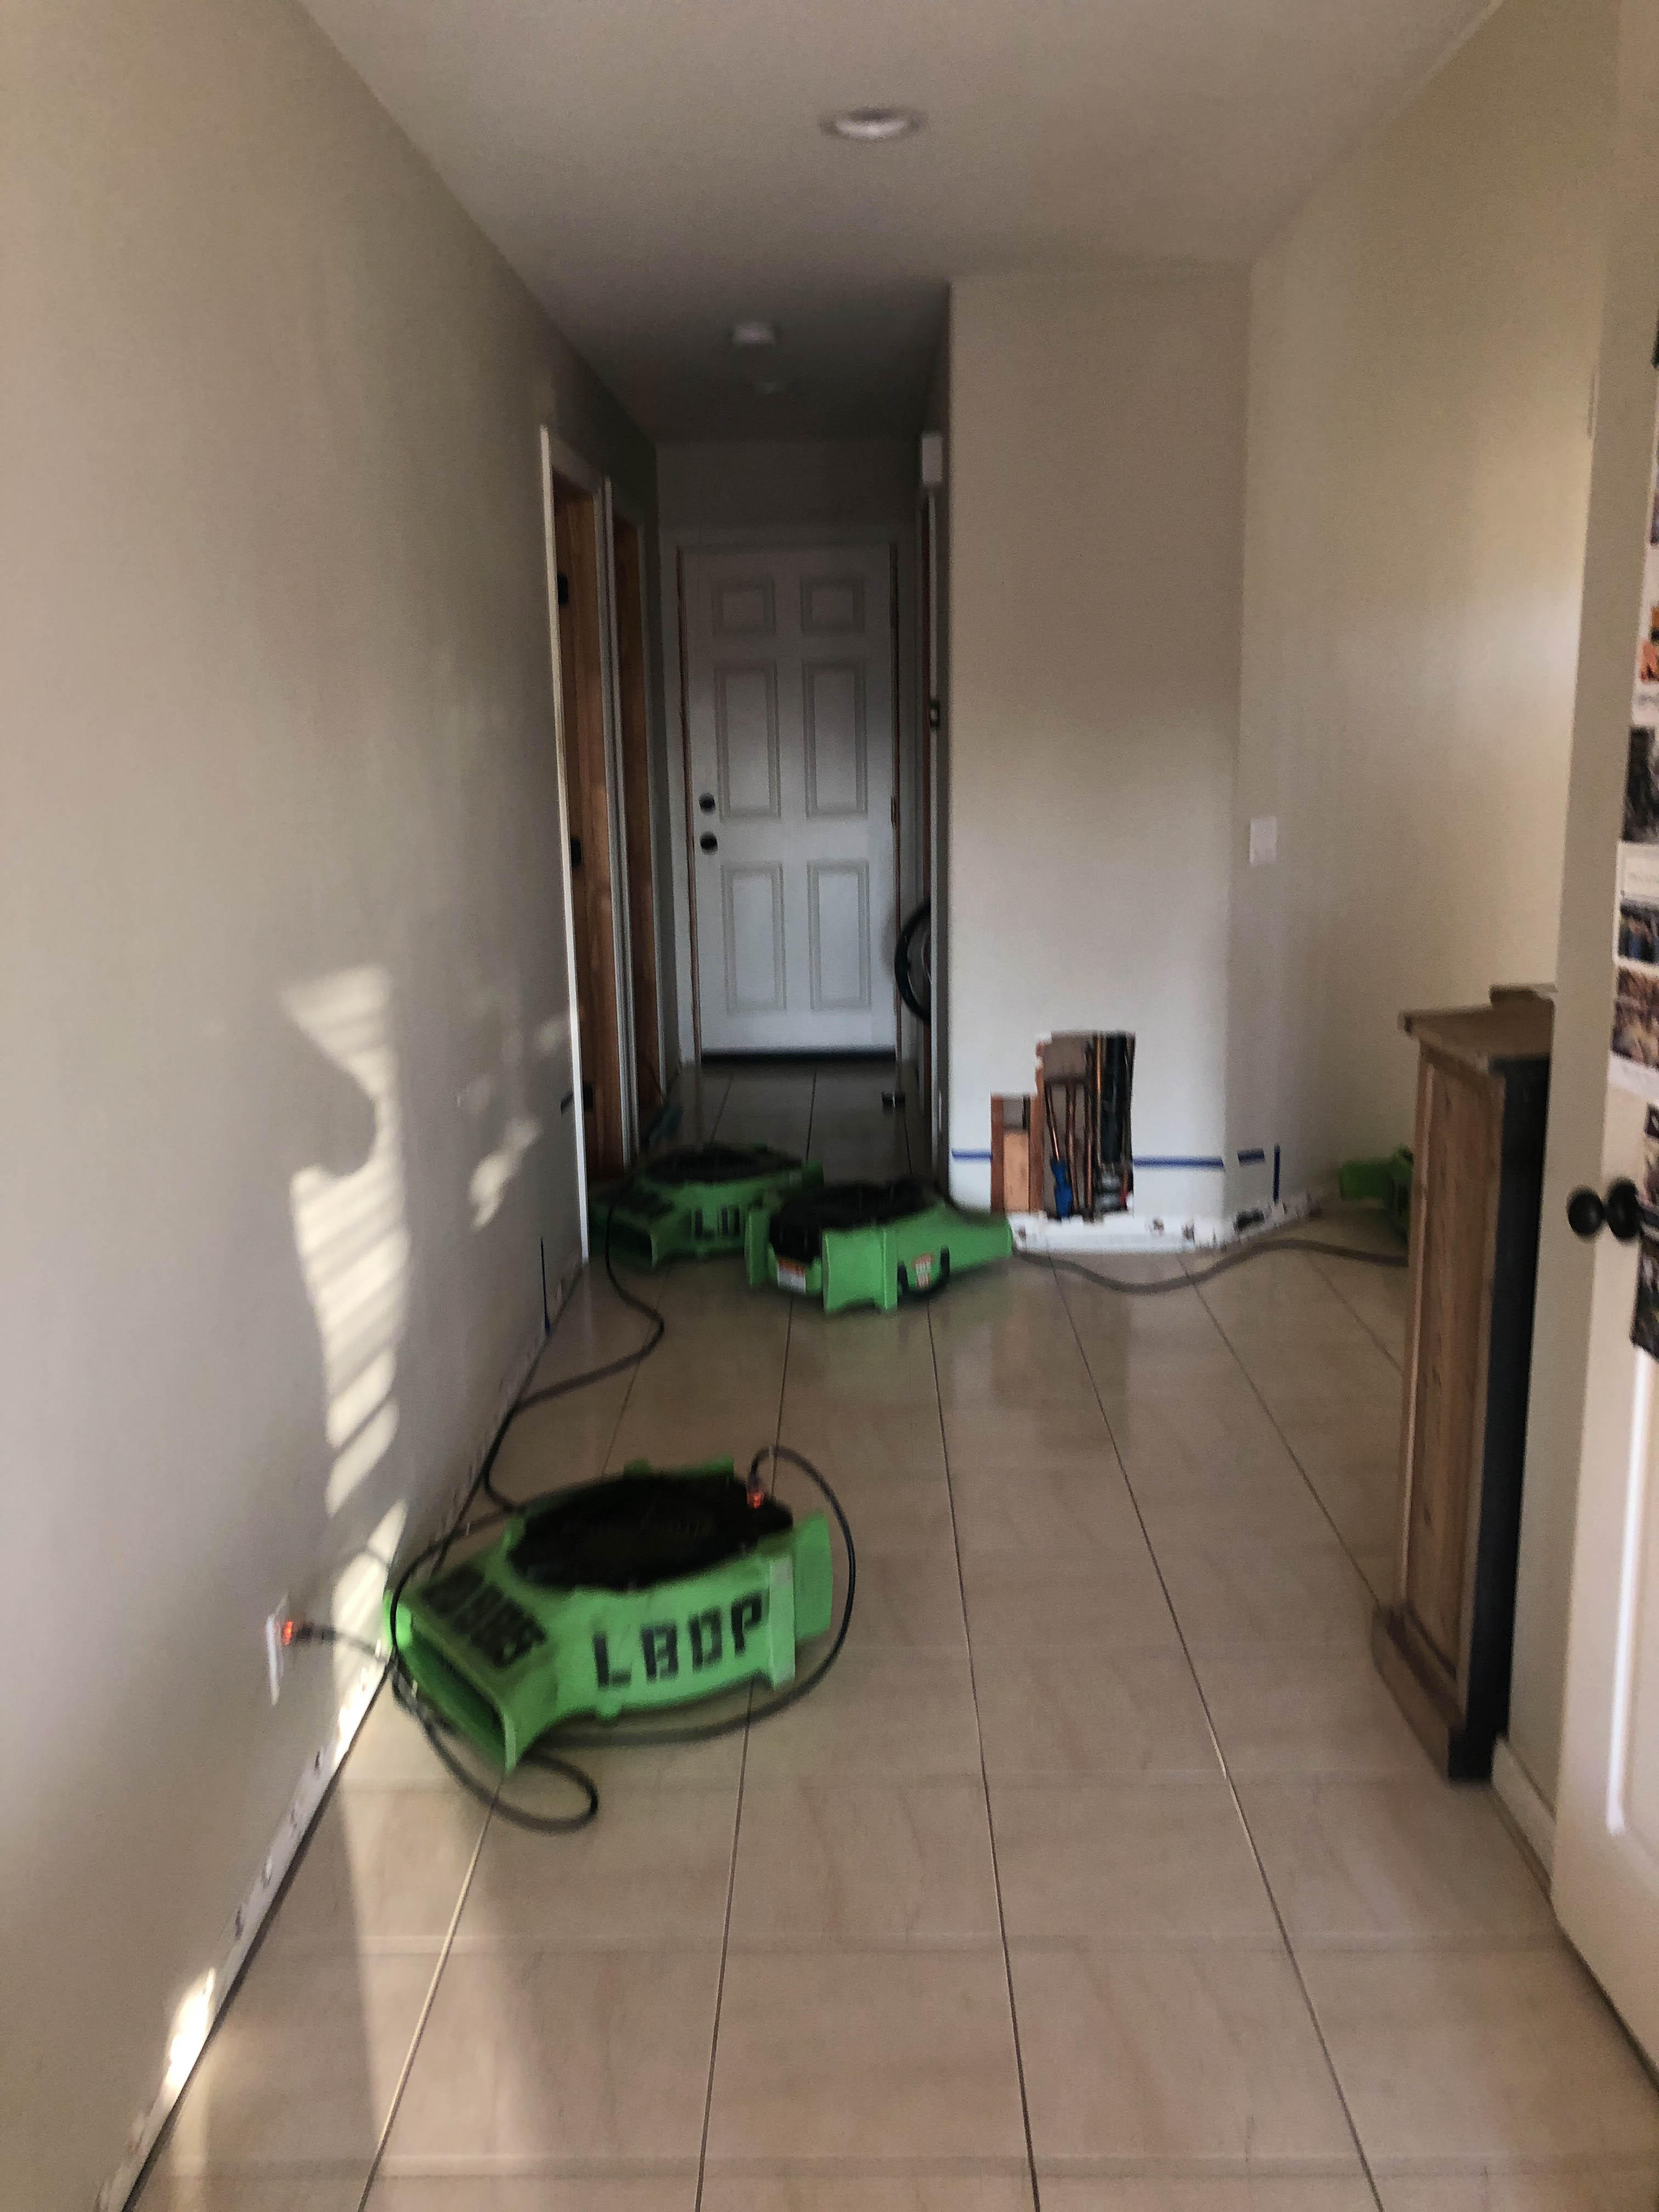 If you have any questions or need an emergency service, call SERVPRO of Laguna Beach today! Our team is always available for response, 24 hours a day, 7 days a week, 365 days a year.